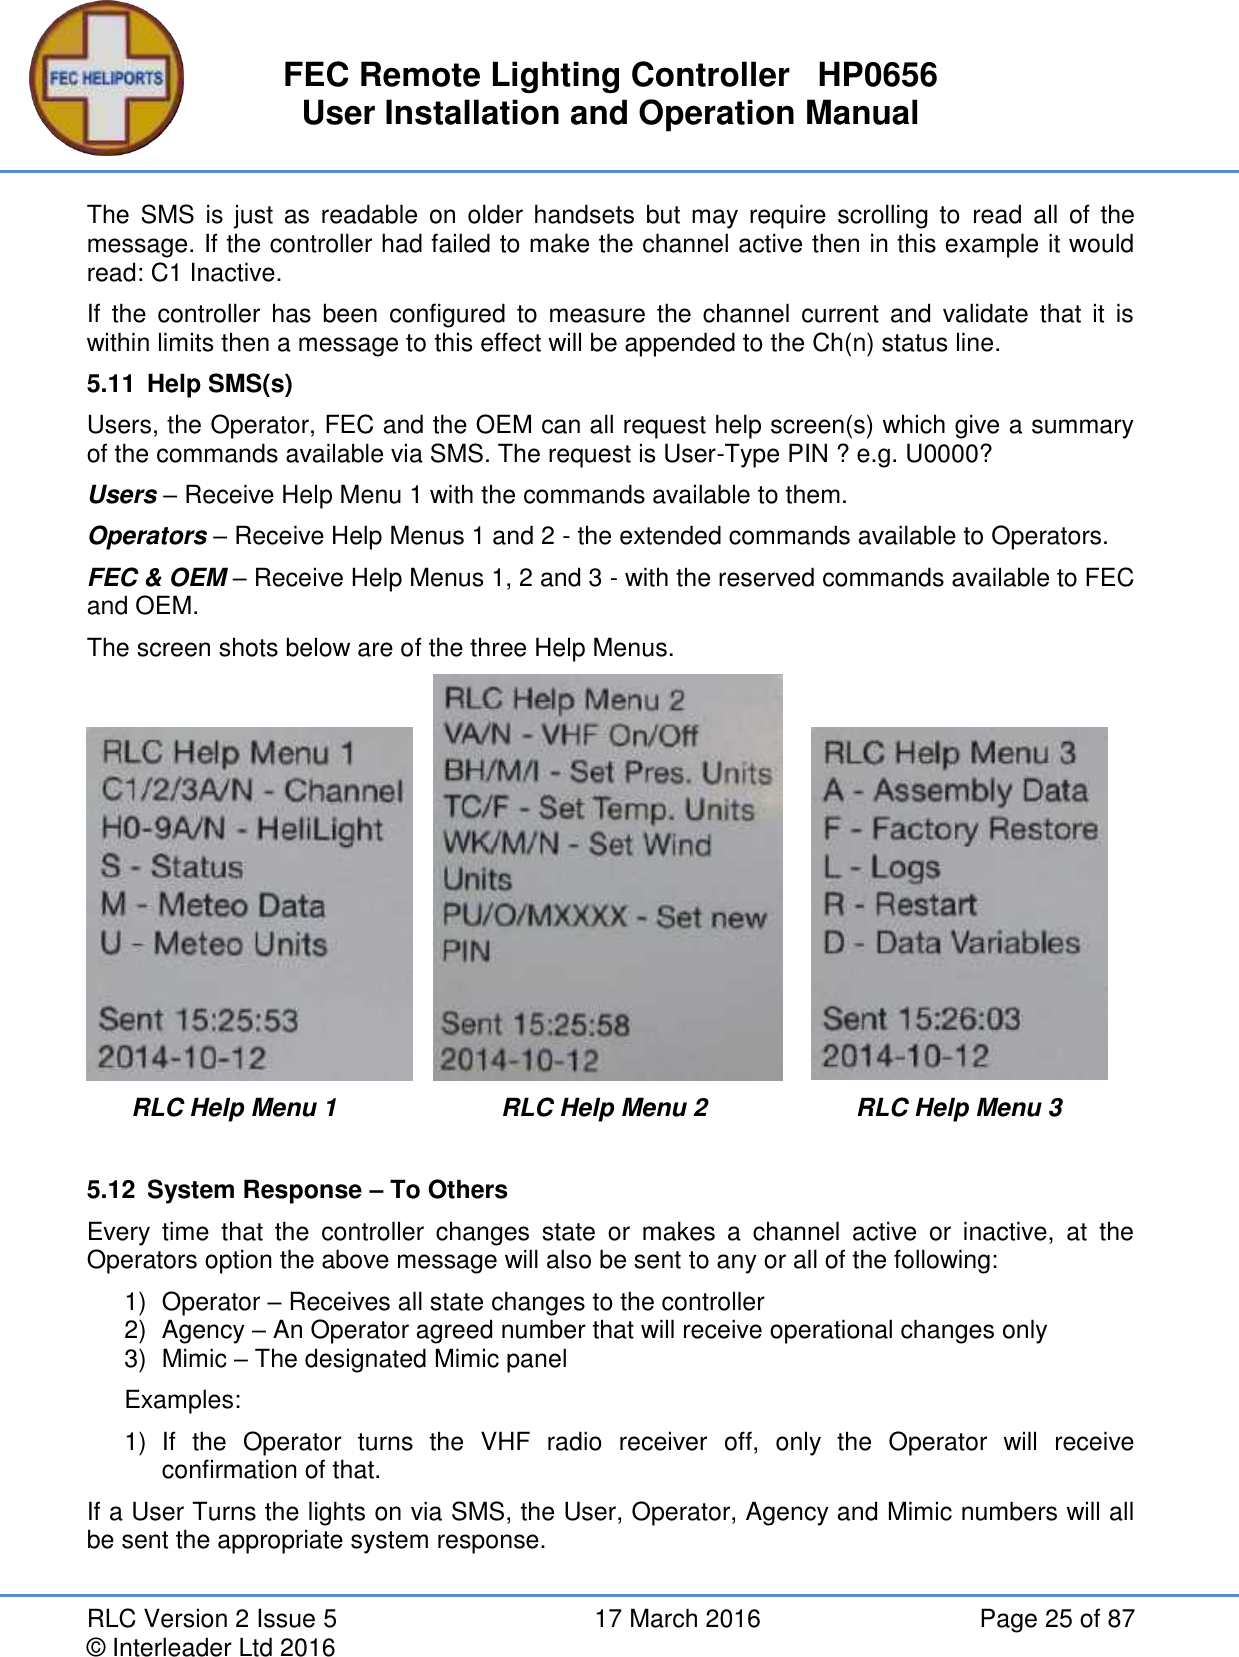 FEC Remote Lighting Controller   HP0656 User Installation and Operation Manual RLC Version 2 Issue 5  17 March 2016  Page 25 of 87 © Interleader Ltd 2016 The  SMS  is  just as readable on older handsets  but  may require scrolling  to  read all of the message. If the controller had failed to make the channel active then in this example it would read: C1 Inactive. If  the controller  has  been  configured  to measure  the  channel  current  and  validate that it  is within limits then a message to this effect will be appended to the Ch(n) status line. 5.11  Help SMS(s) Users, the Operator, FEC and the OEM can all request help screen(s) which give a summary of the commands available via SMS. The request is User-Type PIN ? e.g. U0000? Users – Receive Help Menu 1 with the commands available to them.  Operators – Receive Help Menus 1 and 2 - the extended commands available to Operators. FEC &amp; OEM – Receive Help Menus 1, 2 and 3 - with the reserved commands available to FEC and OEM. The screen shots below are of the three Help Menus.           RLC Help Menu 1  RLC Help Menu 2  RLC Help Menu 3   5.12  System Response – To Others Every  time  that  the  controller  changes  state  or  makes  a  channel  active  or  inactive,  at  the Operators option the above message will also be sent to any or all of the following: 1)  Operator – Receives all state changes to the controller 2)  Agency – An Operator agreed number that will receive operational changes only 3)  Mimic – The designated Mimic panel Examples: 1)  If  the  Operator  turns  the  VHF  radio  receiver  off,  only  the  Operator  will  receive confirmation of that. If a User Turns the lights on via SMS, the User, Operator, Agency and Mimic numbers will all be sent the appropriate system response. 